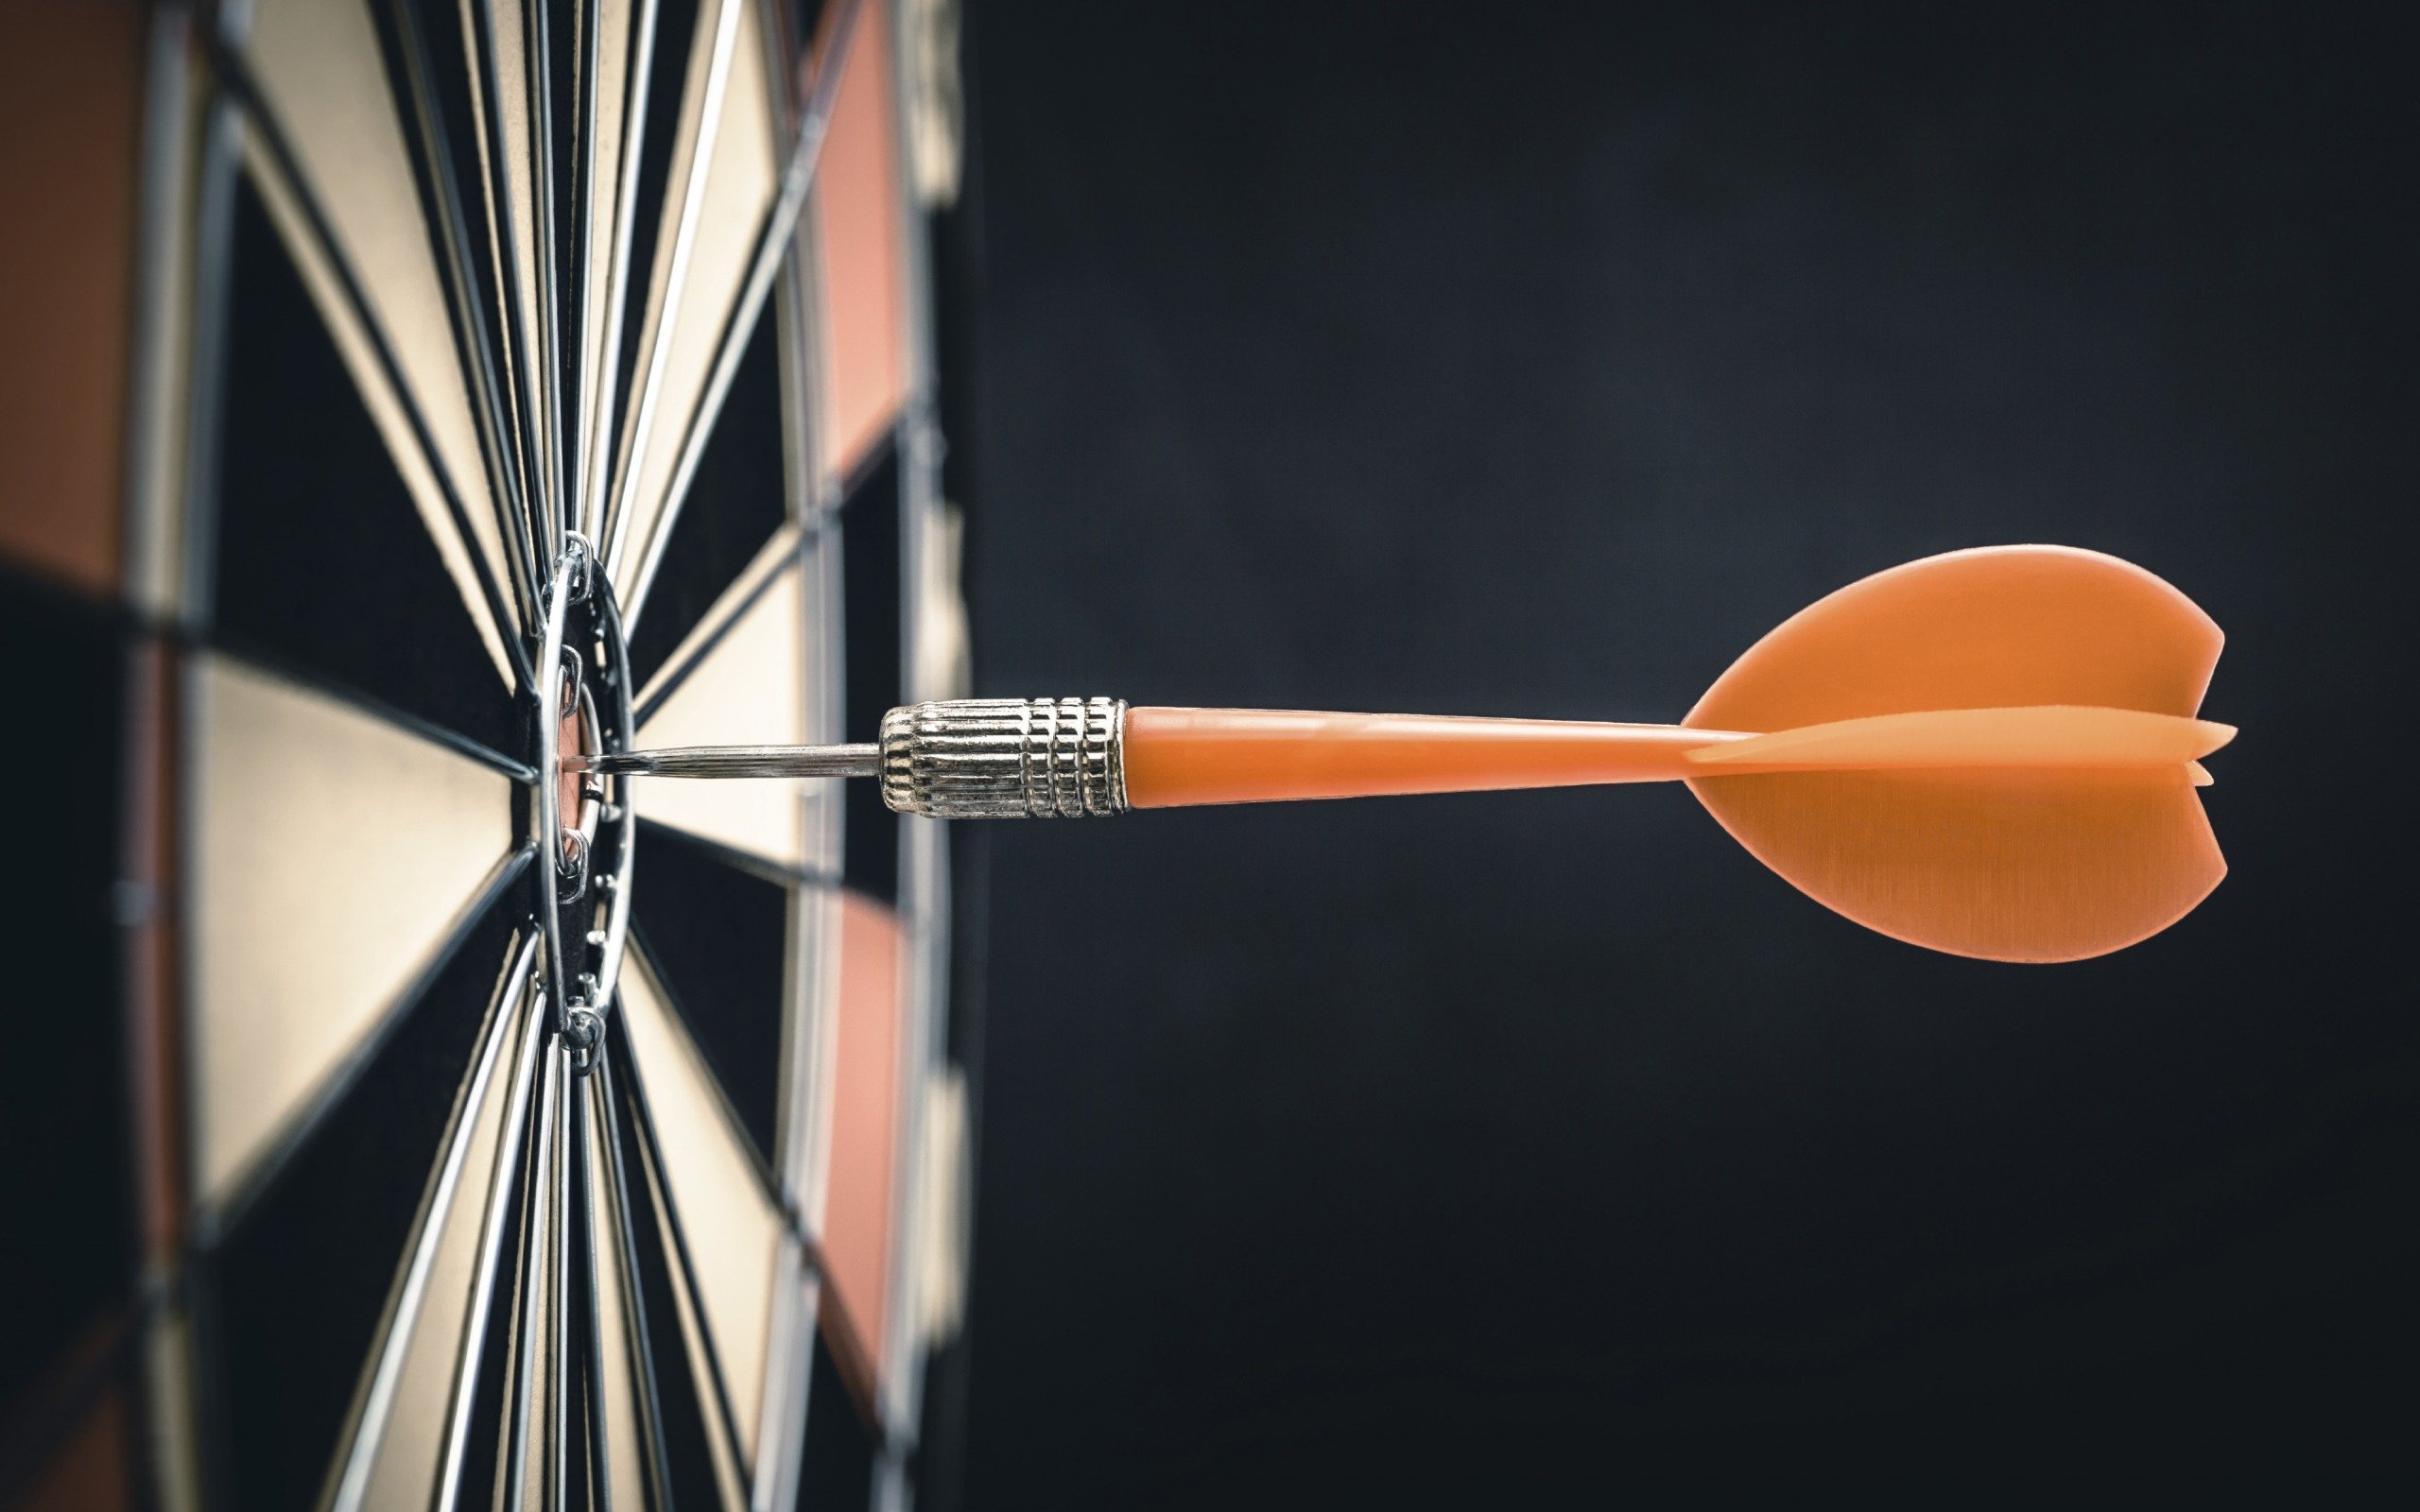 Download wallpapers darts, goal, throwing darts, business concepts, exact  hit, target for desktop with resolution 2560x1600. High Quality HD pictures  wallpapers